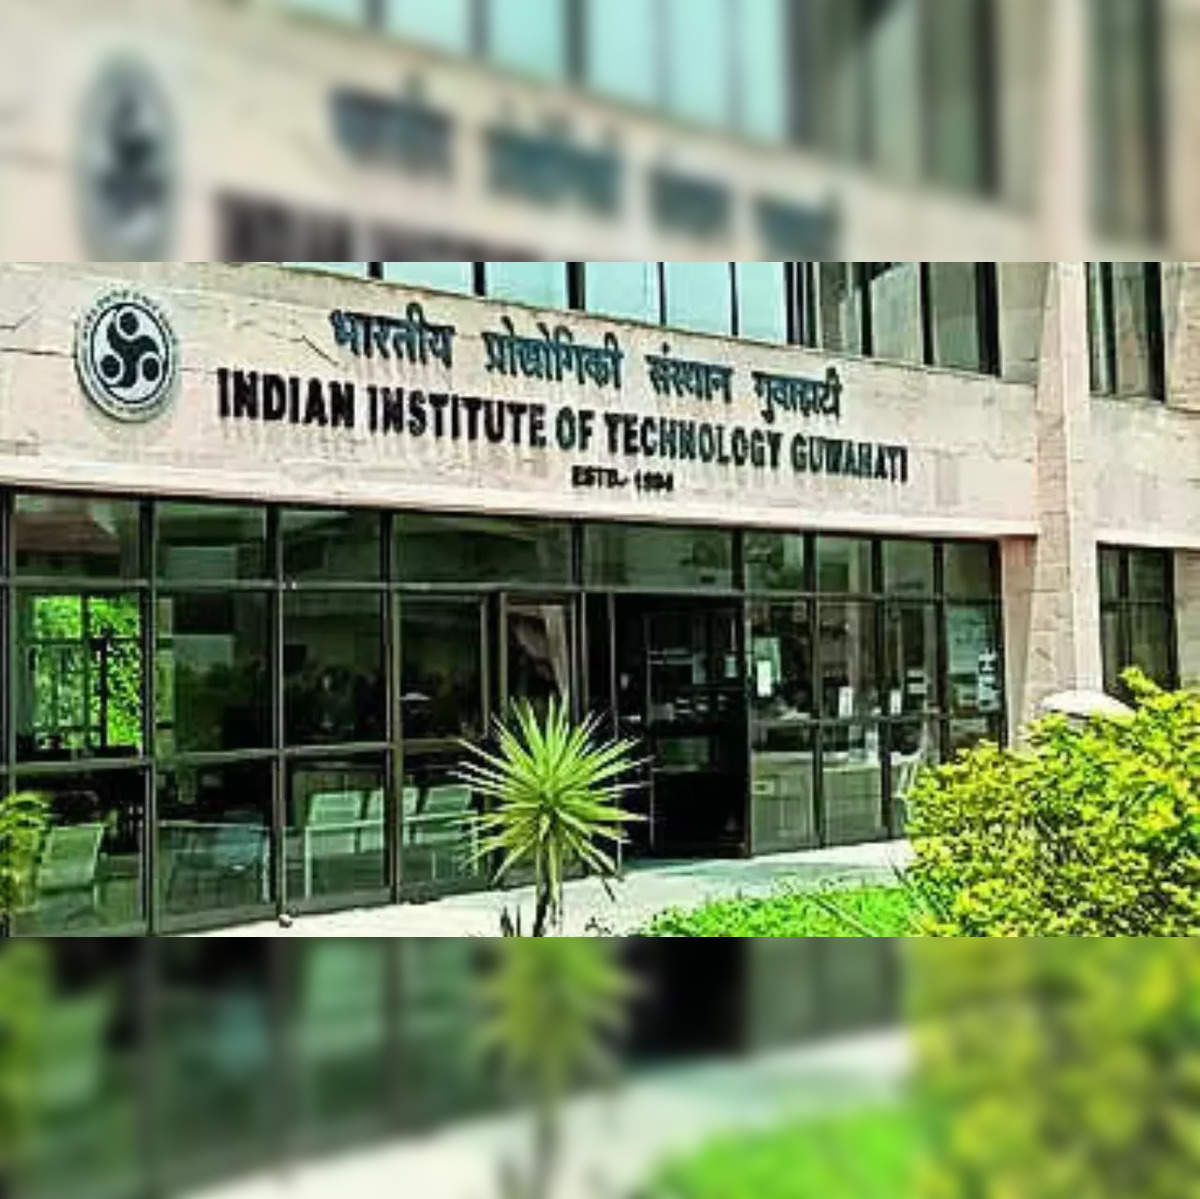 EVs, the new future: IIT Madras launches certificate course on e